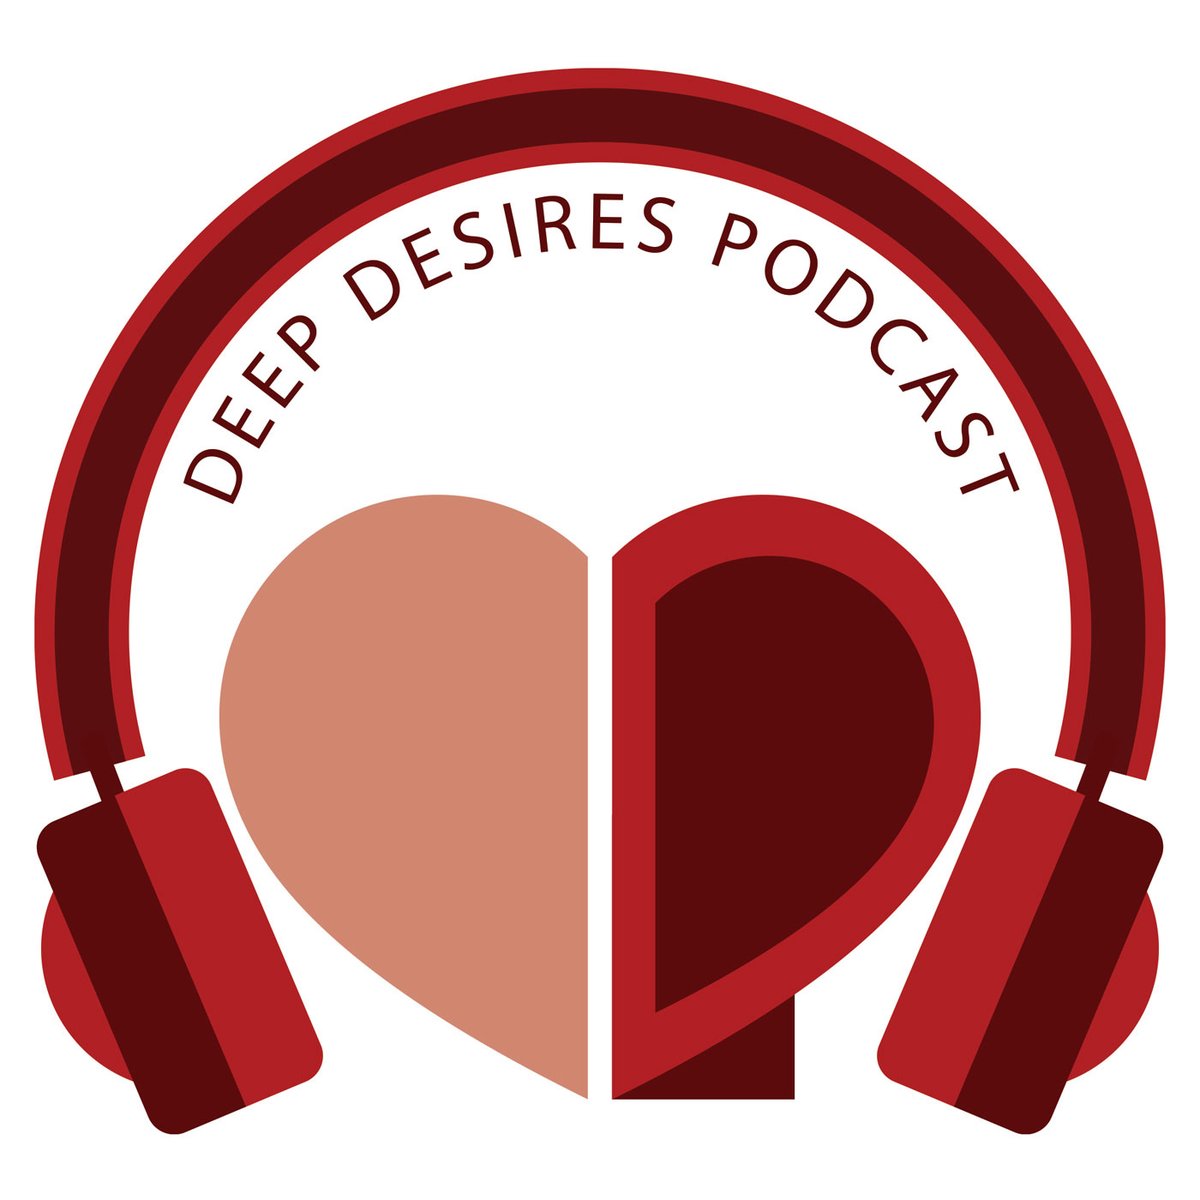 I used to host Deep Desires Podcast -- a podcast with the cool authors over at Deep Desires Press! Archived episodes available on Apple Podcasts, Google Play Music, and Stitcher! deepdesirespress.com/podcast/ #podcast #bookchat